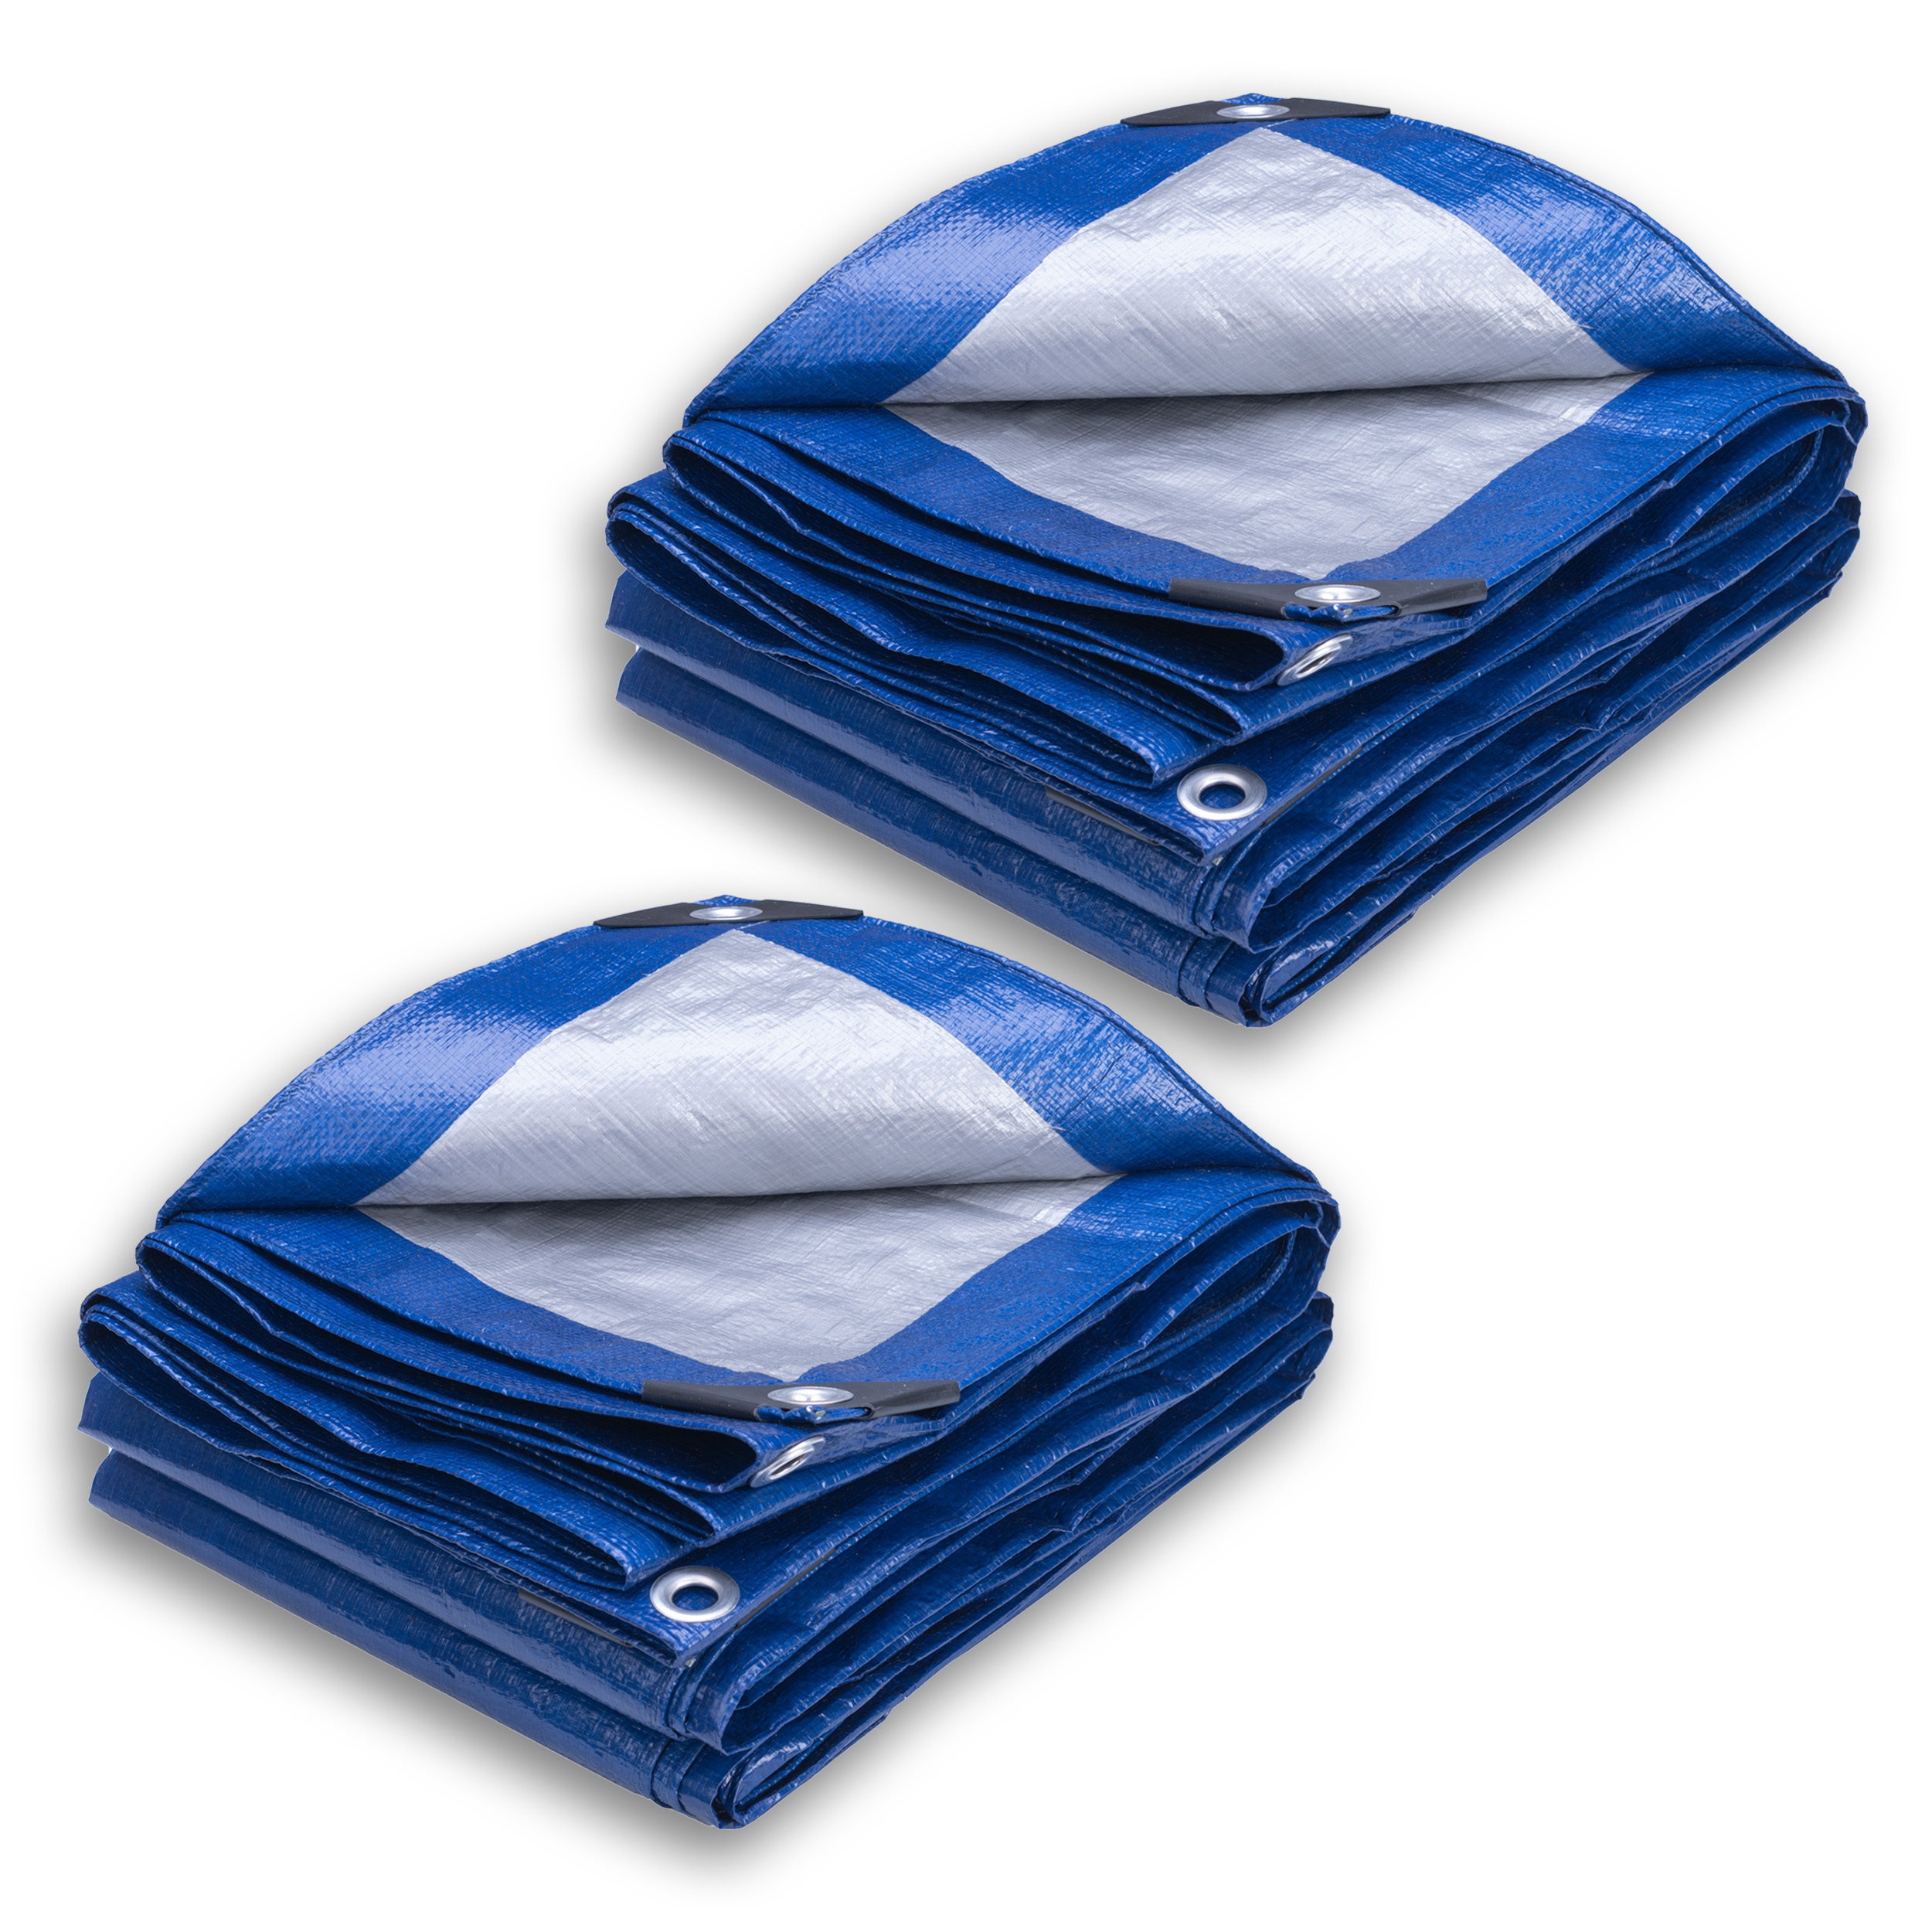 Brackit 2 Pack Heavy Duty PE BlueTarpaulin; 2x3m; Thick Woven 140GSM Waterproof Double-Sided Fabric - Supreme Versatility for Covering, Protecting or 